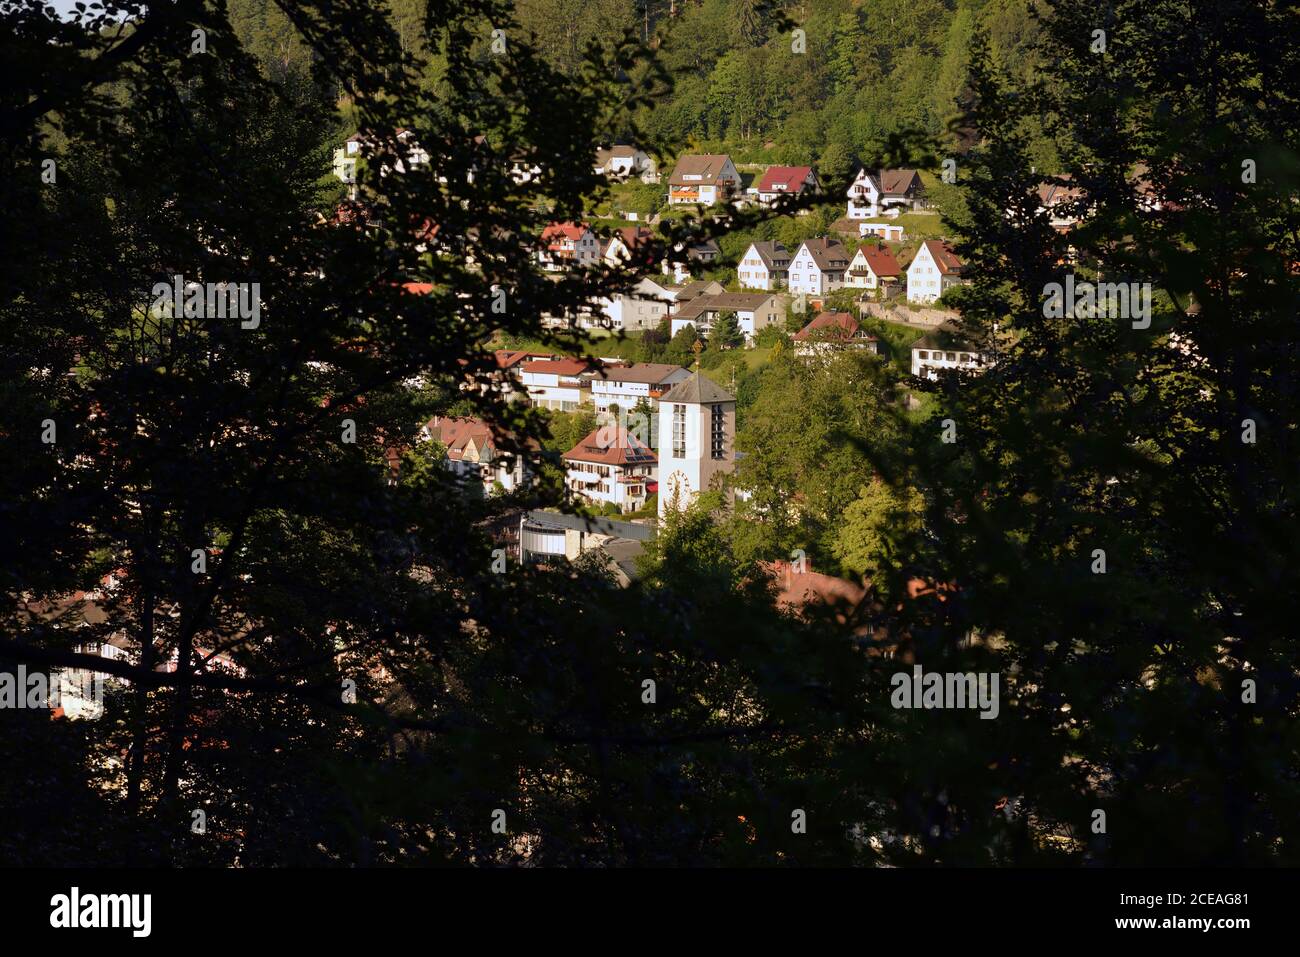 A view of the small town of Triberg in the Black Forest, Germany. Stock Photo